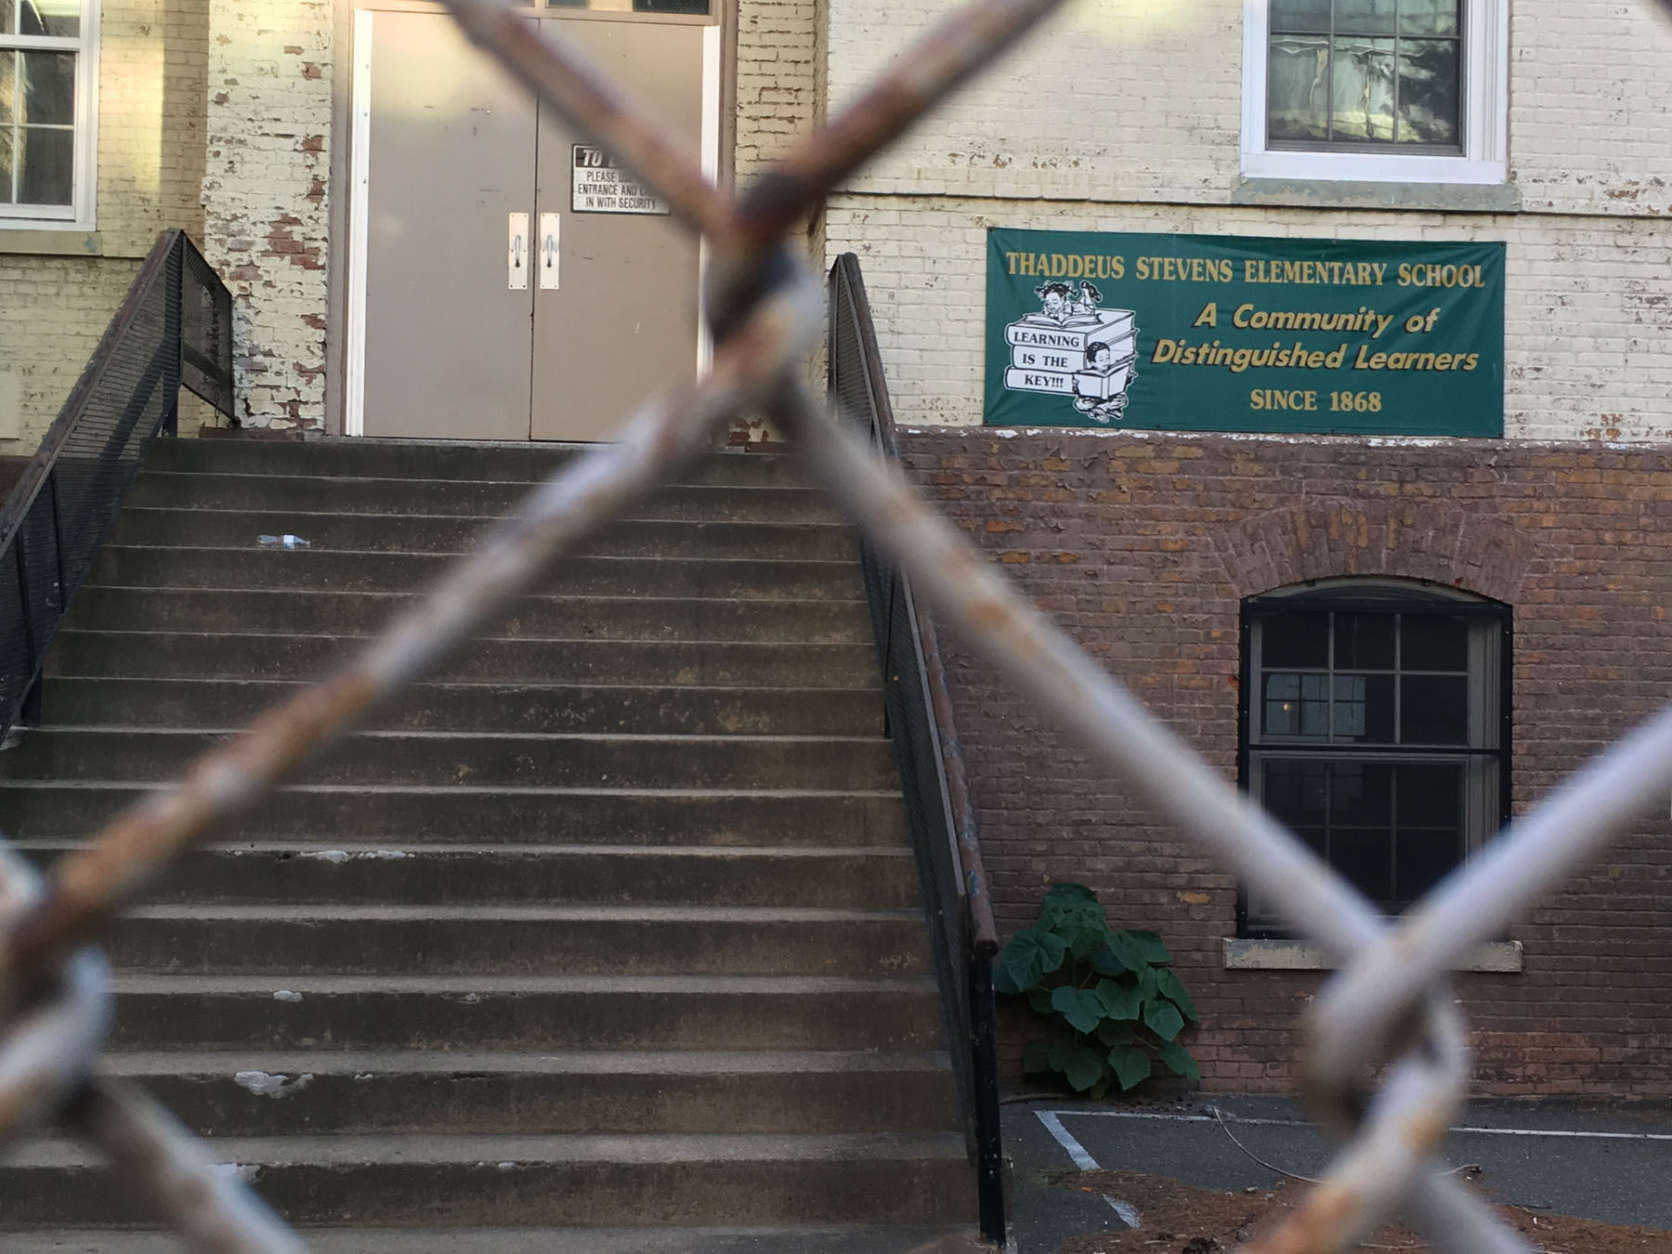 Stevens Elementary is now tucked away by a chain-link fence, looking somewhat out of place amid downtown D.C. office buildings. (WTOP/Jack Moore)